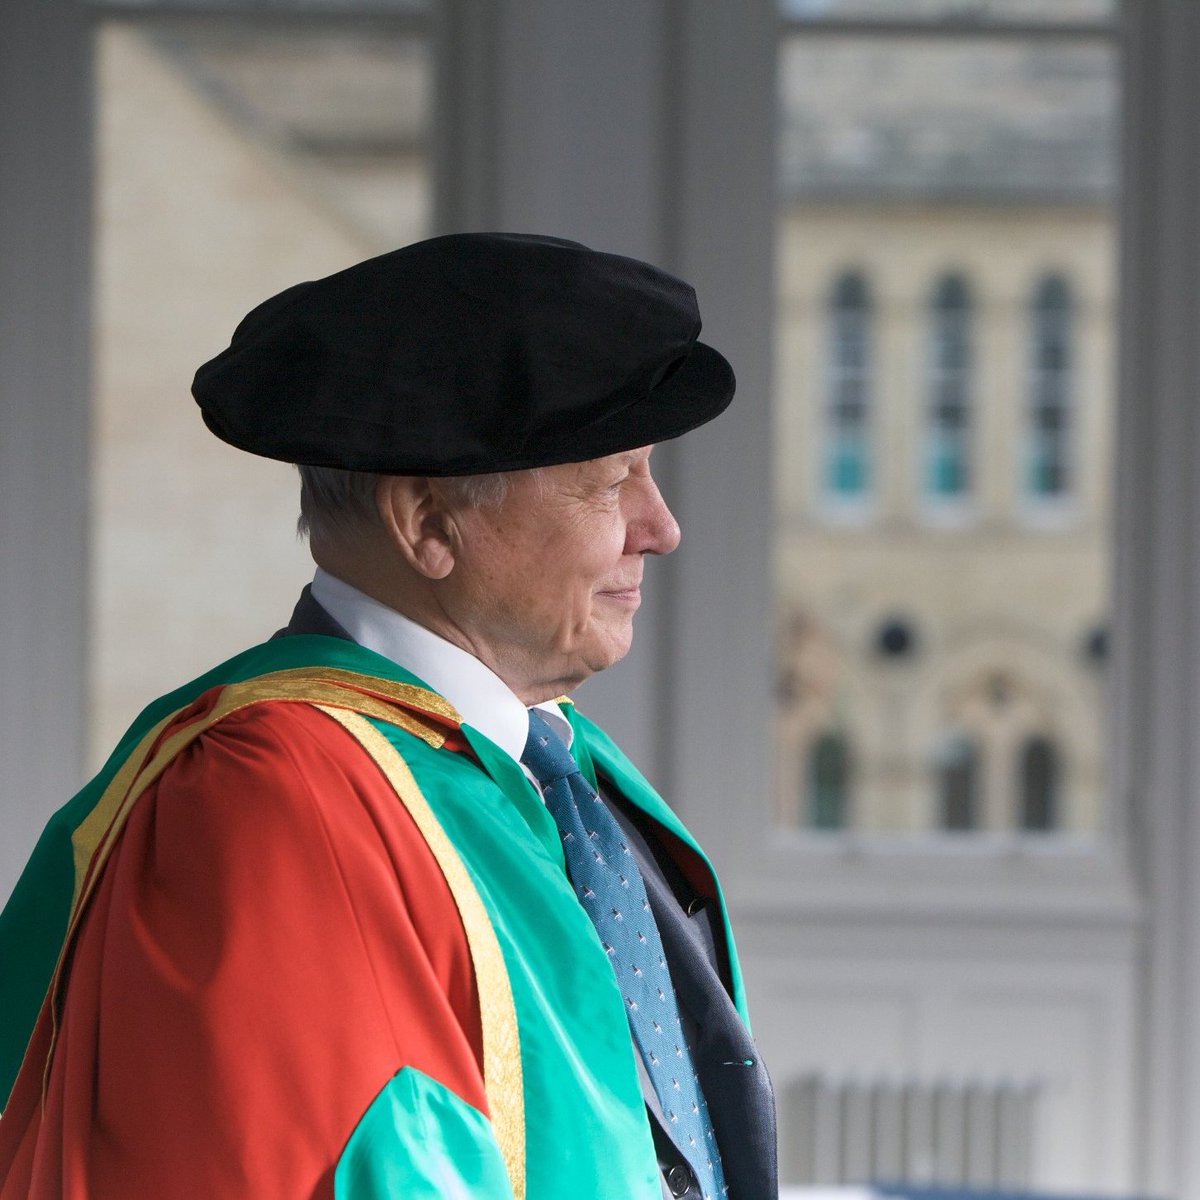 Happy 98th birthday to Sir David Attenborough! 🎂 He received an honorary degree from NTU in 2010 for his outstanding contribution to public awareness and understanding about life on Earth. #ProudToBeNTU